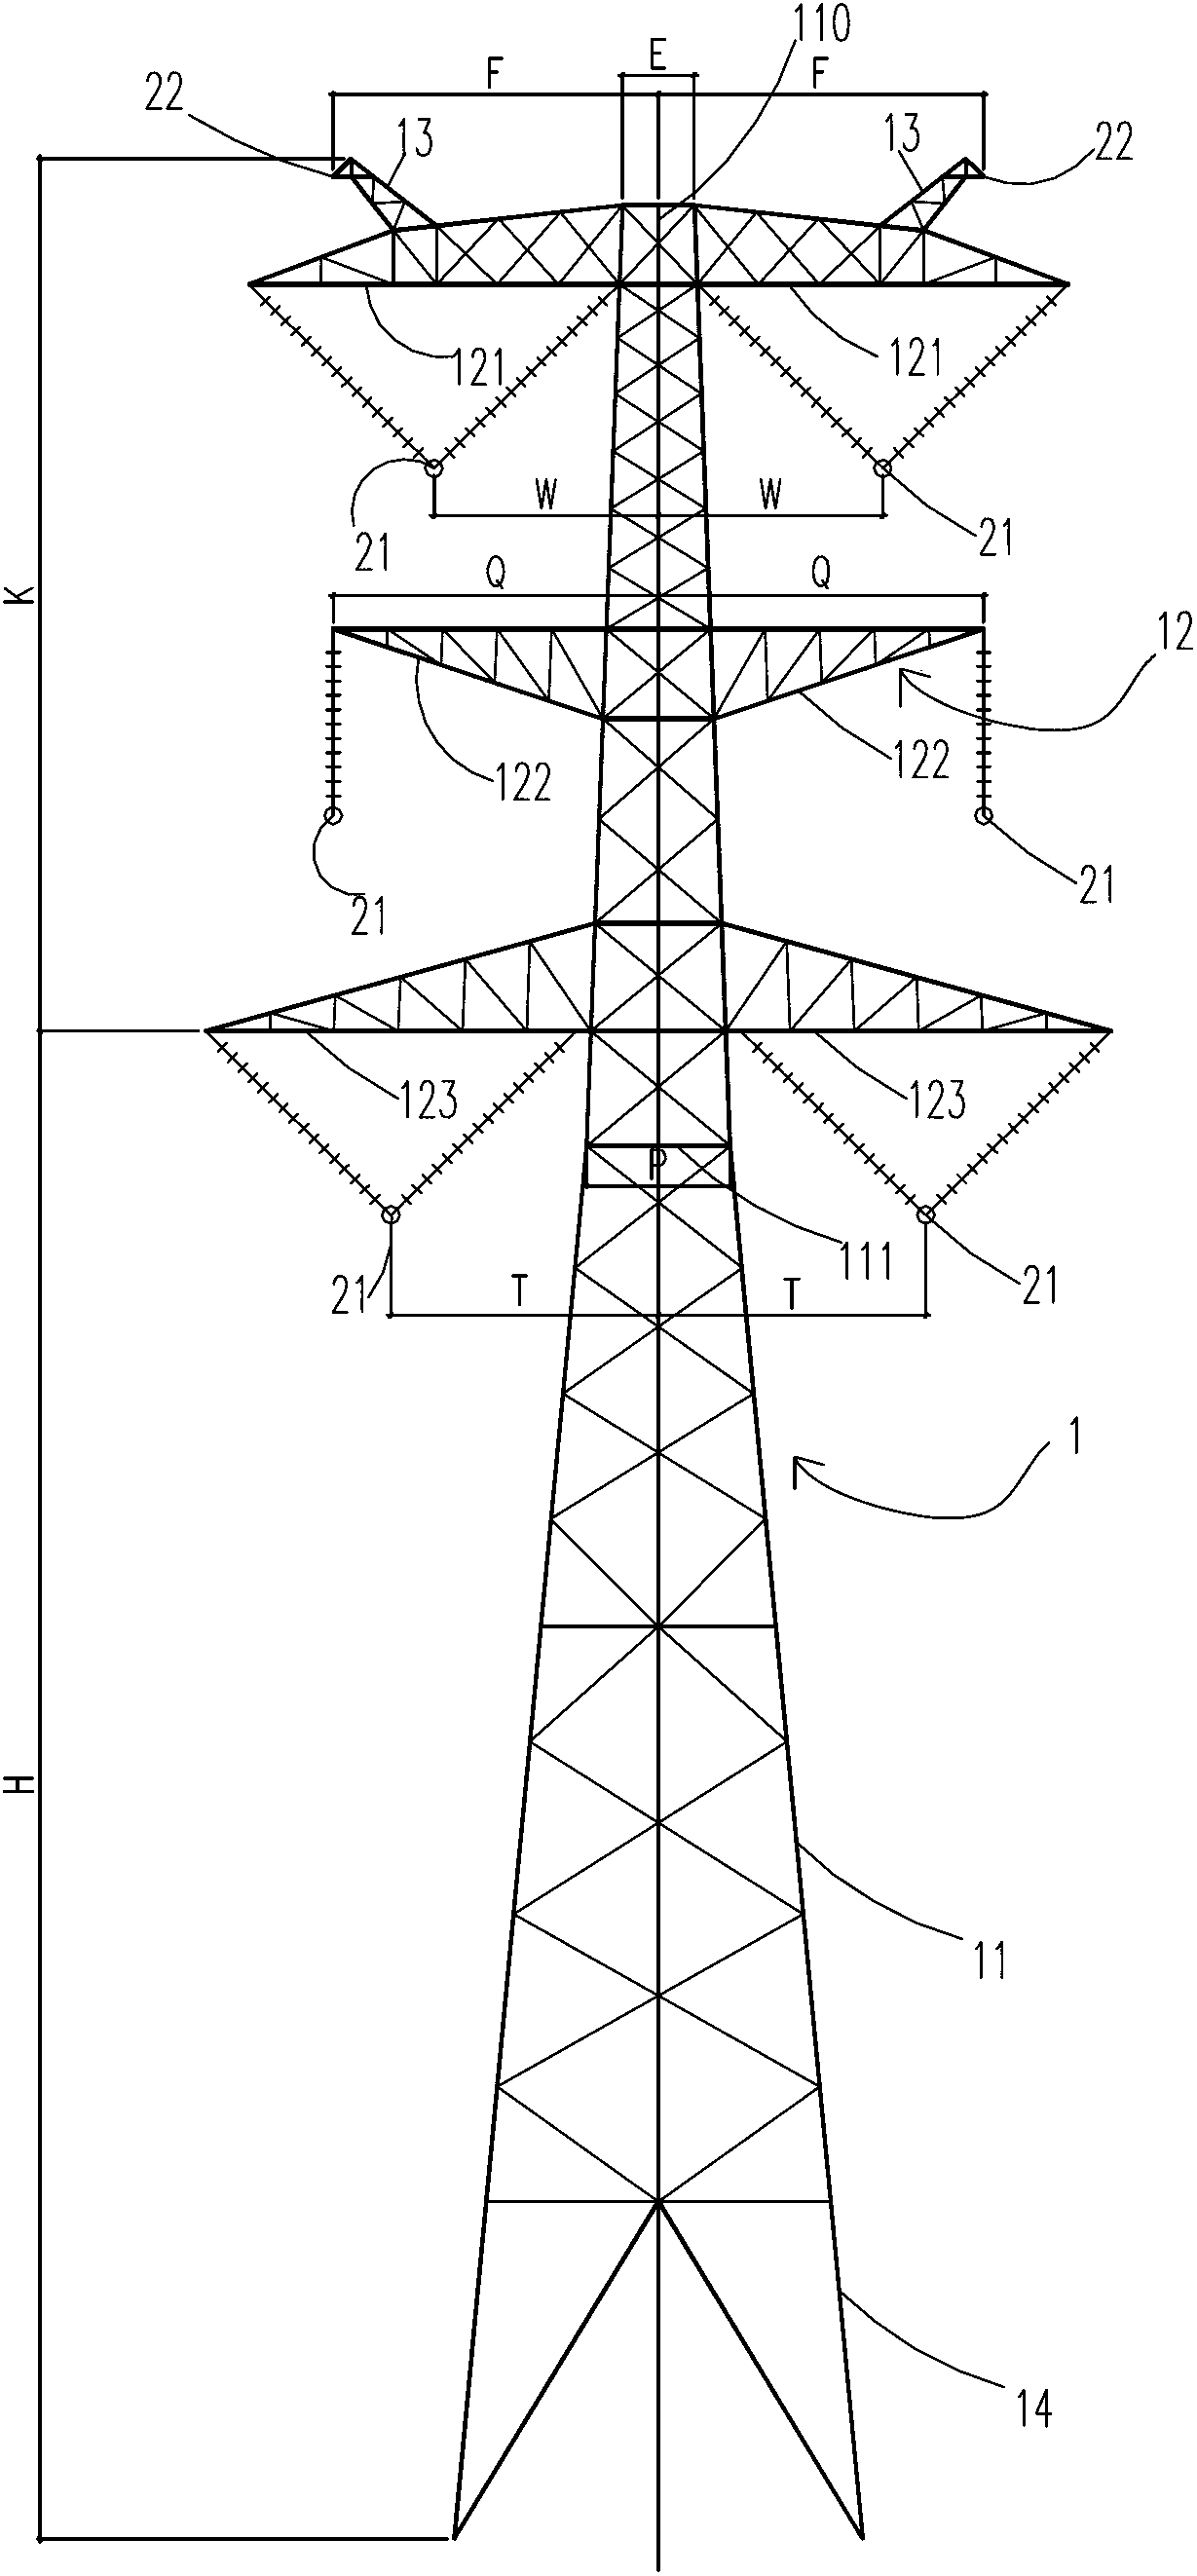 Double loop VIV (vortex induced vibration) string-drum-shaped tangent tower